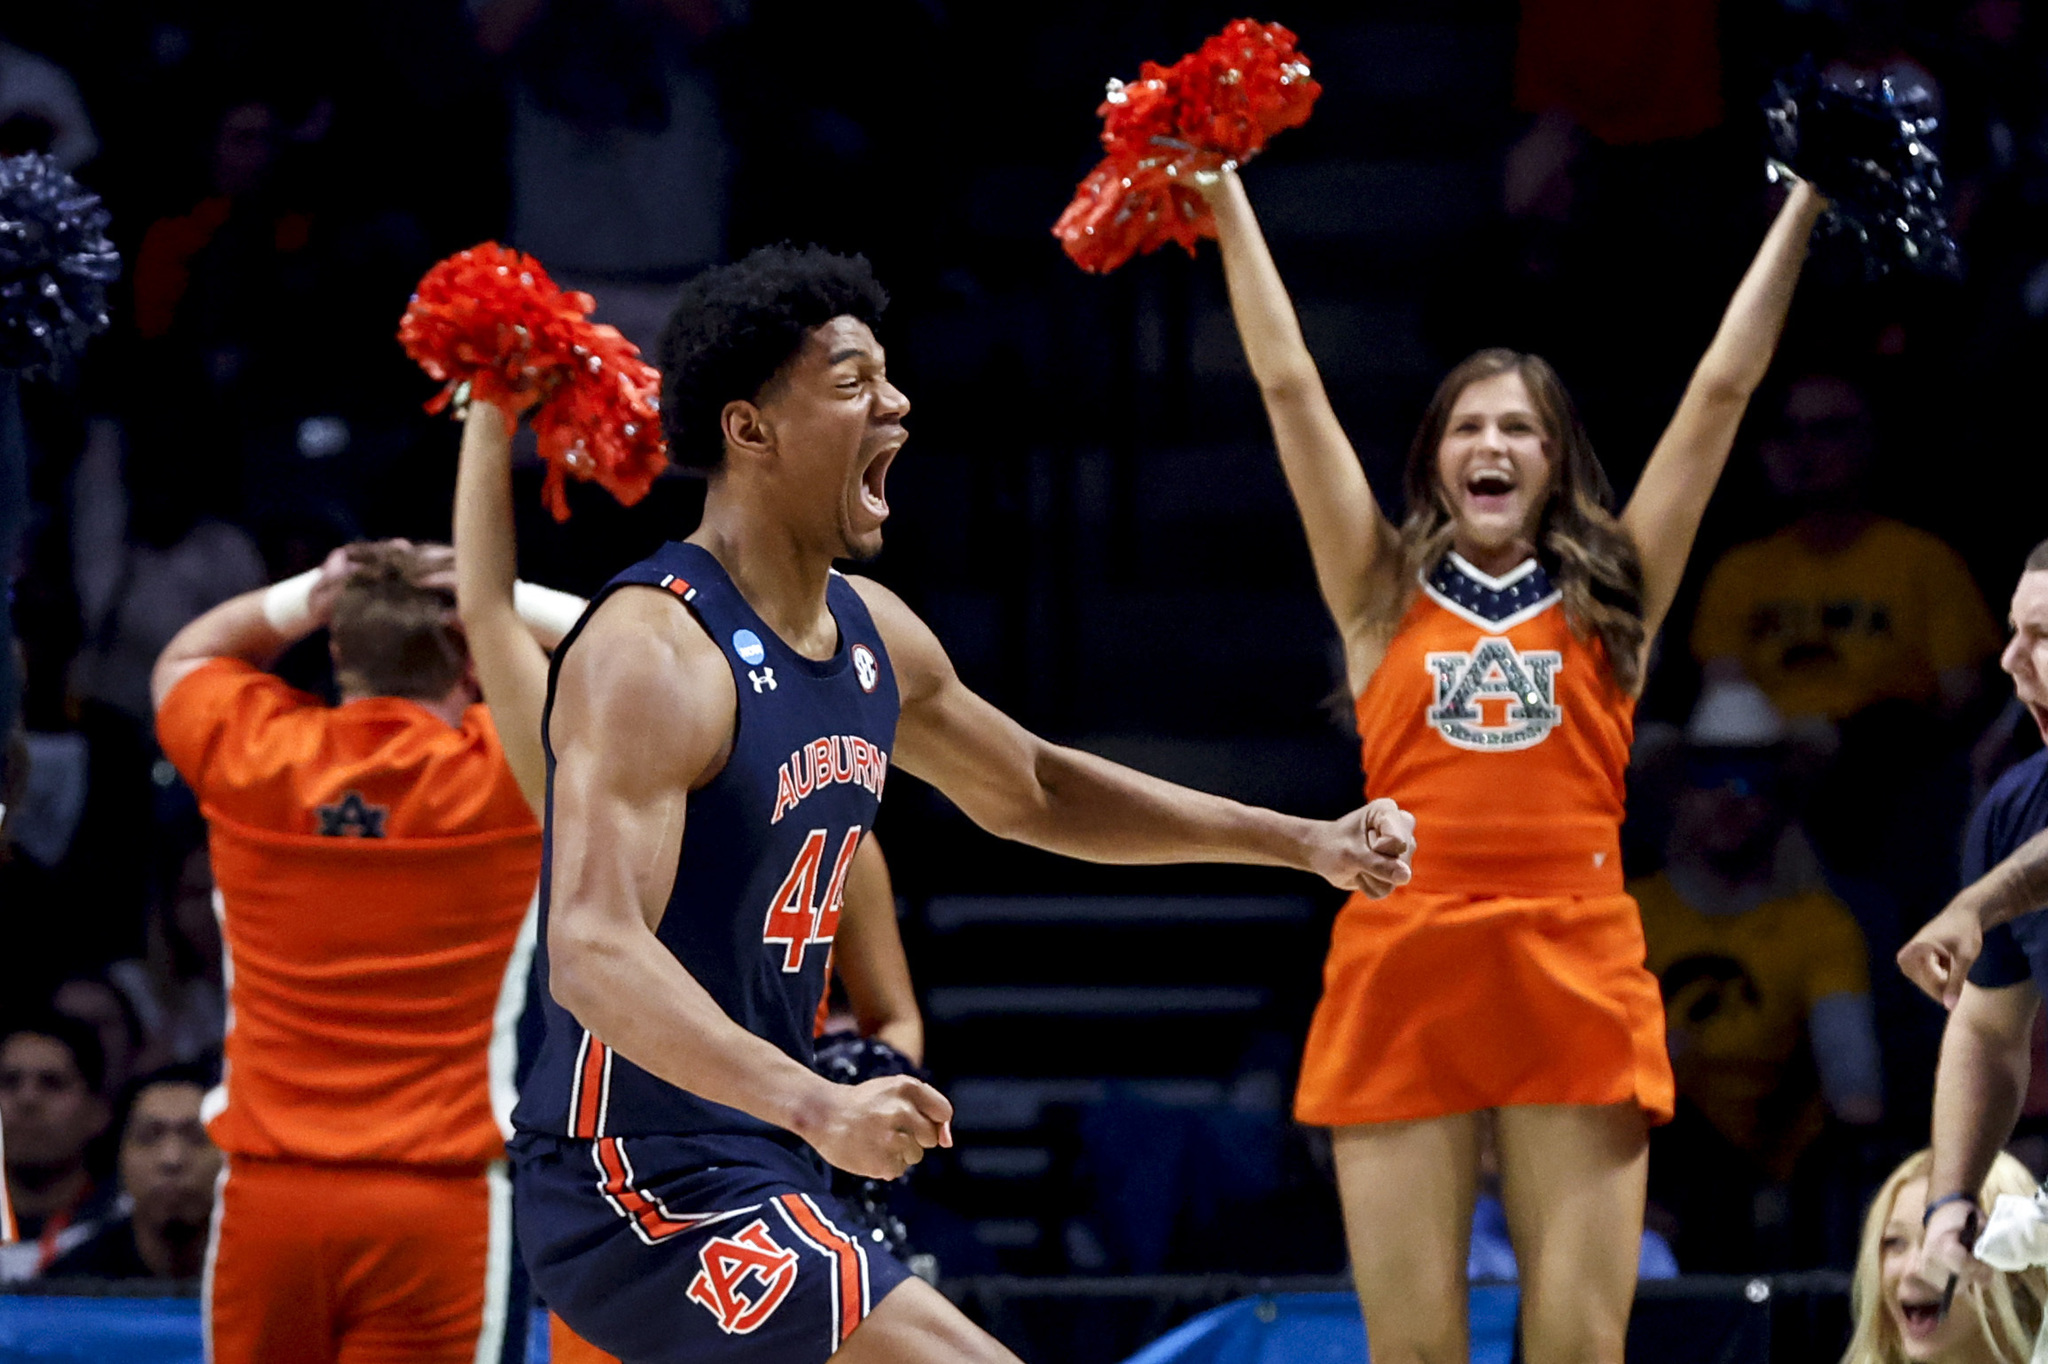 Auburn center Dylan Cardwell reacts after a basket against Iowa during the second half of a first-round college basketball game in the men's NCAA Tournament in Birmingham, (LAPRESSE, Photo/Butch Dill)